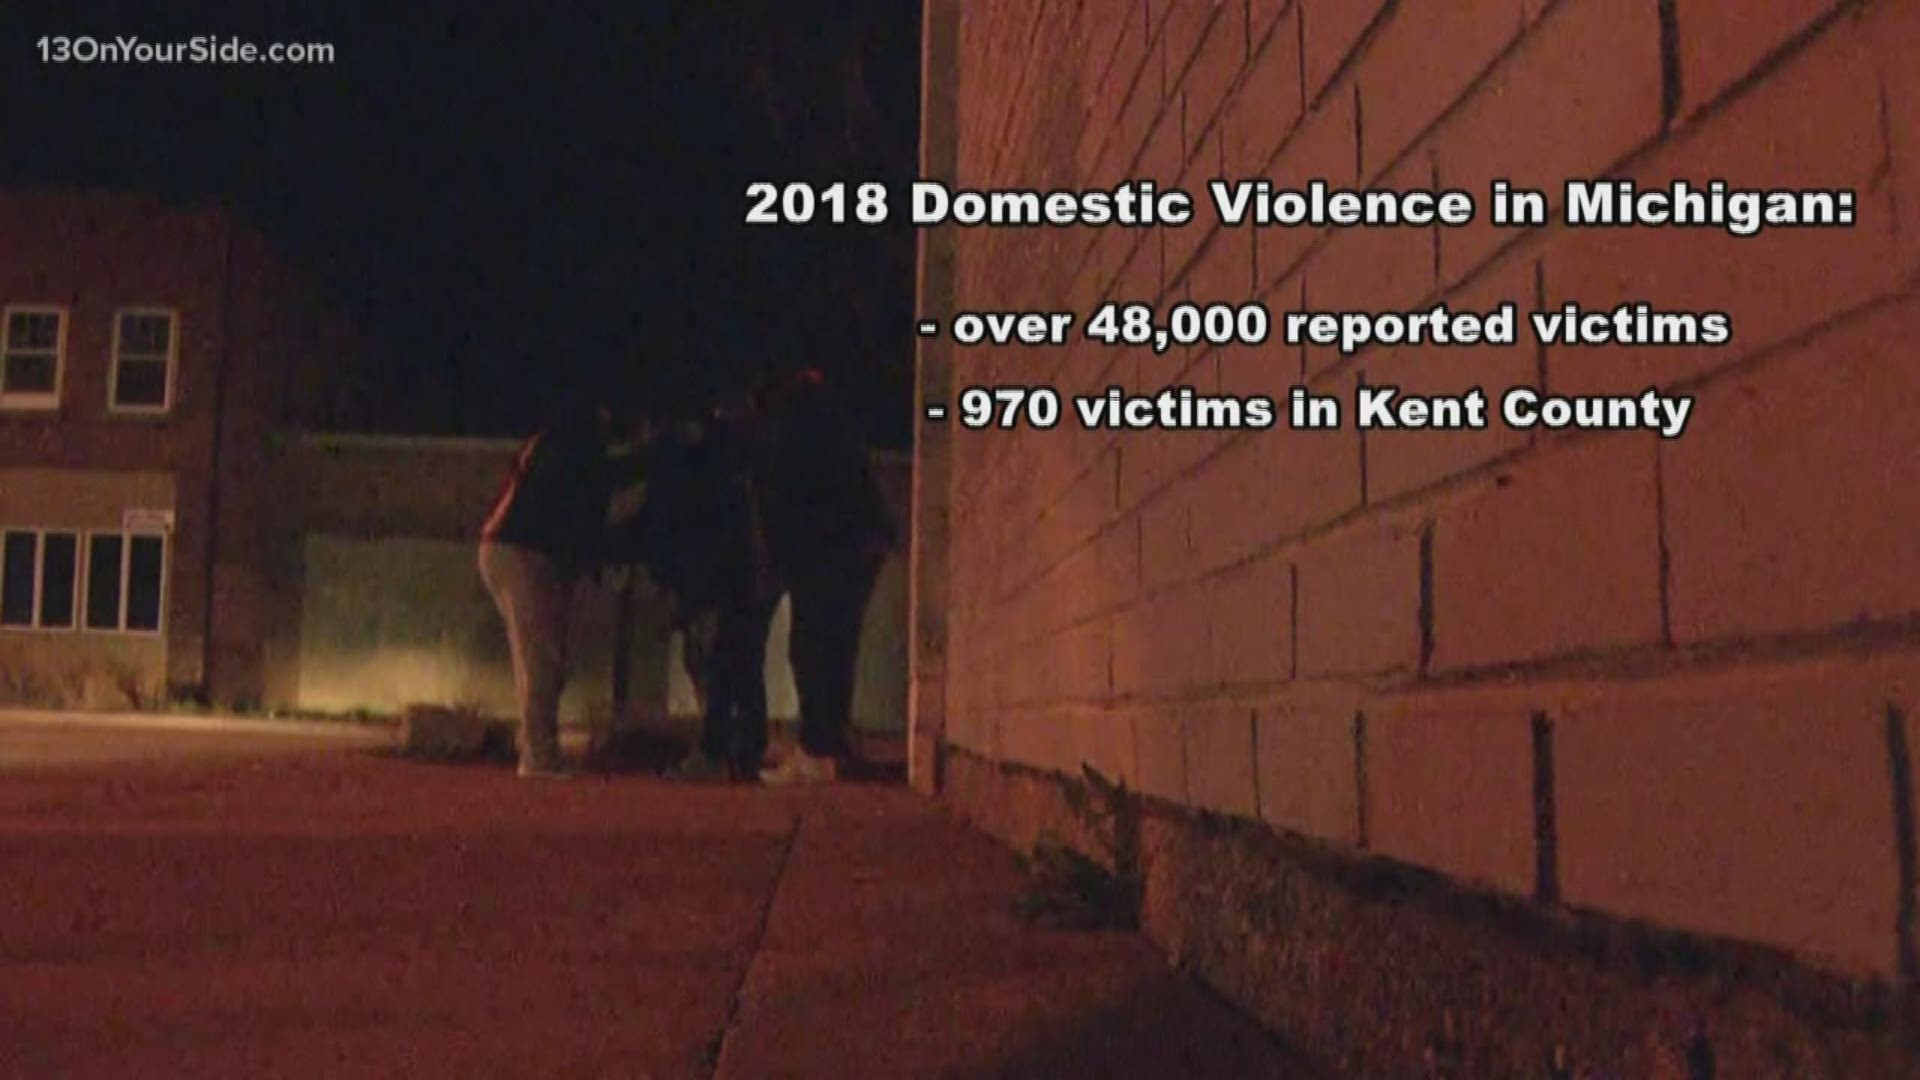 While many are sheltering in their homes to stay safe, domestic violence agencies are reminding the community that for some individuals home can be dangerous.